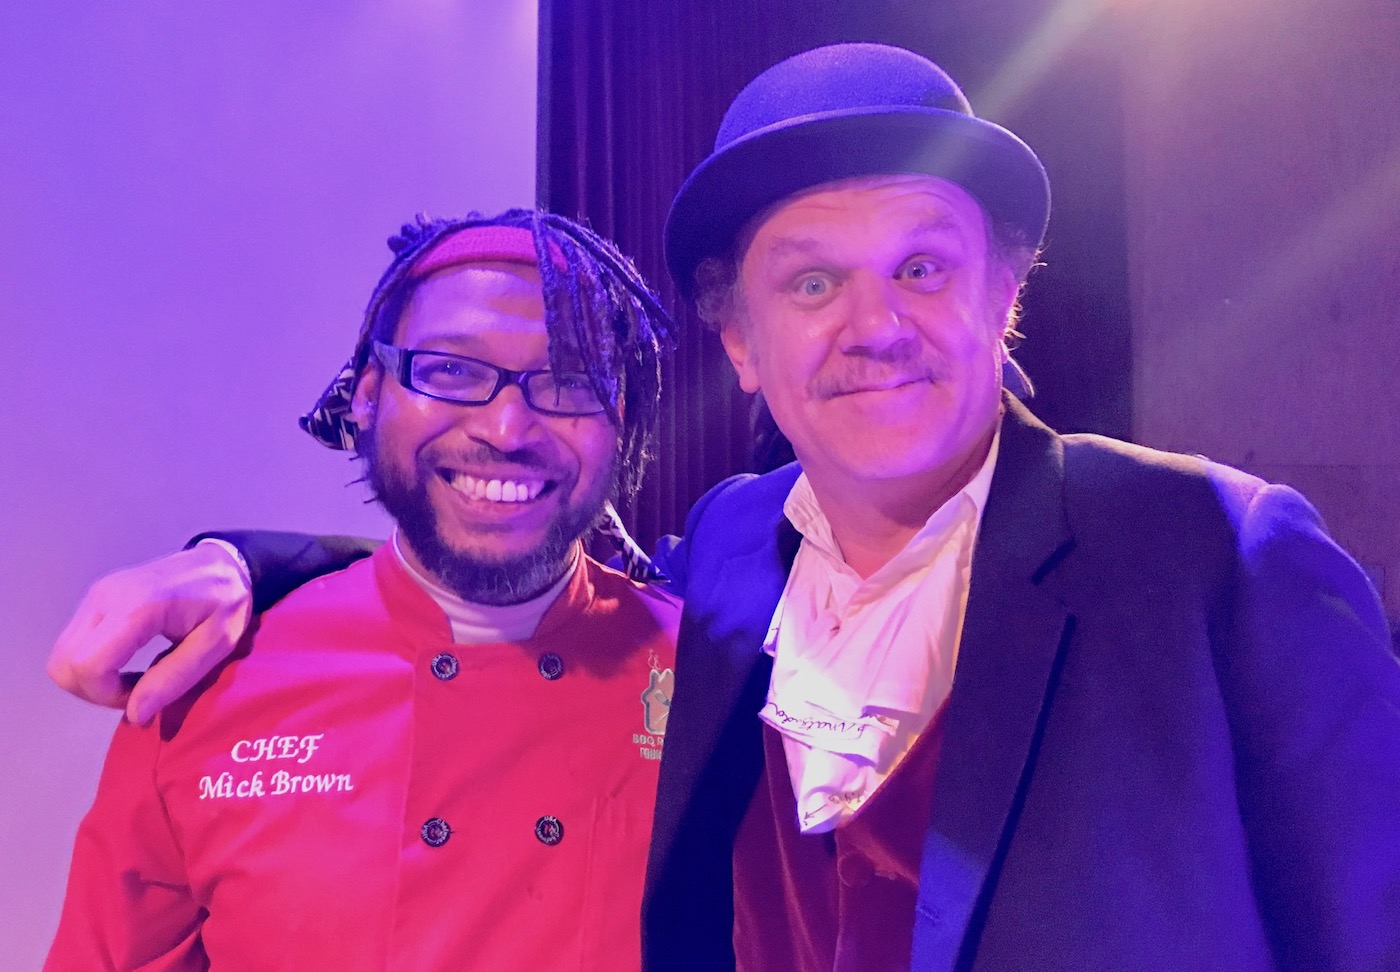 Chef Mick and John C. Reilly at Bootleg Theater LA